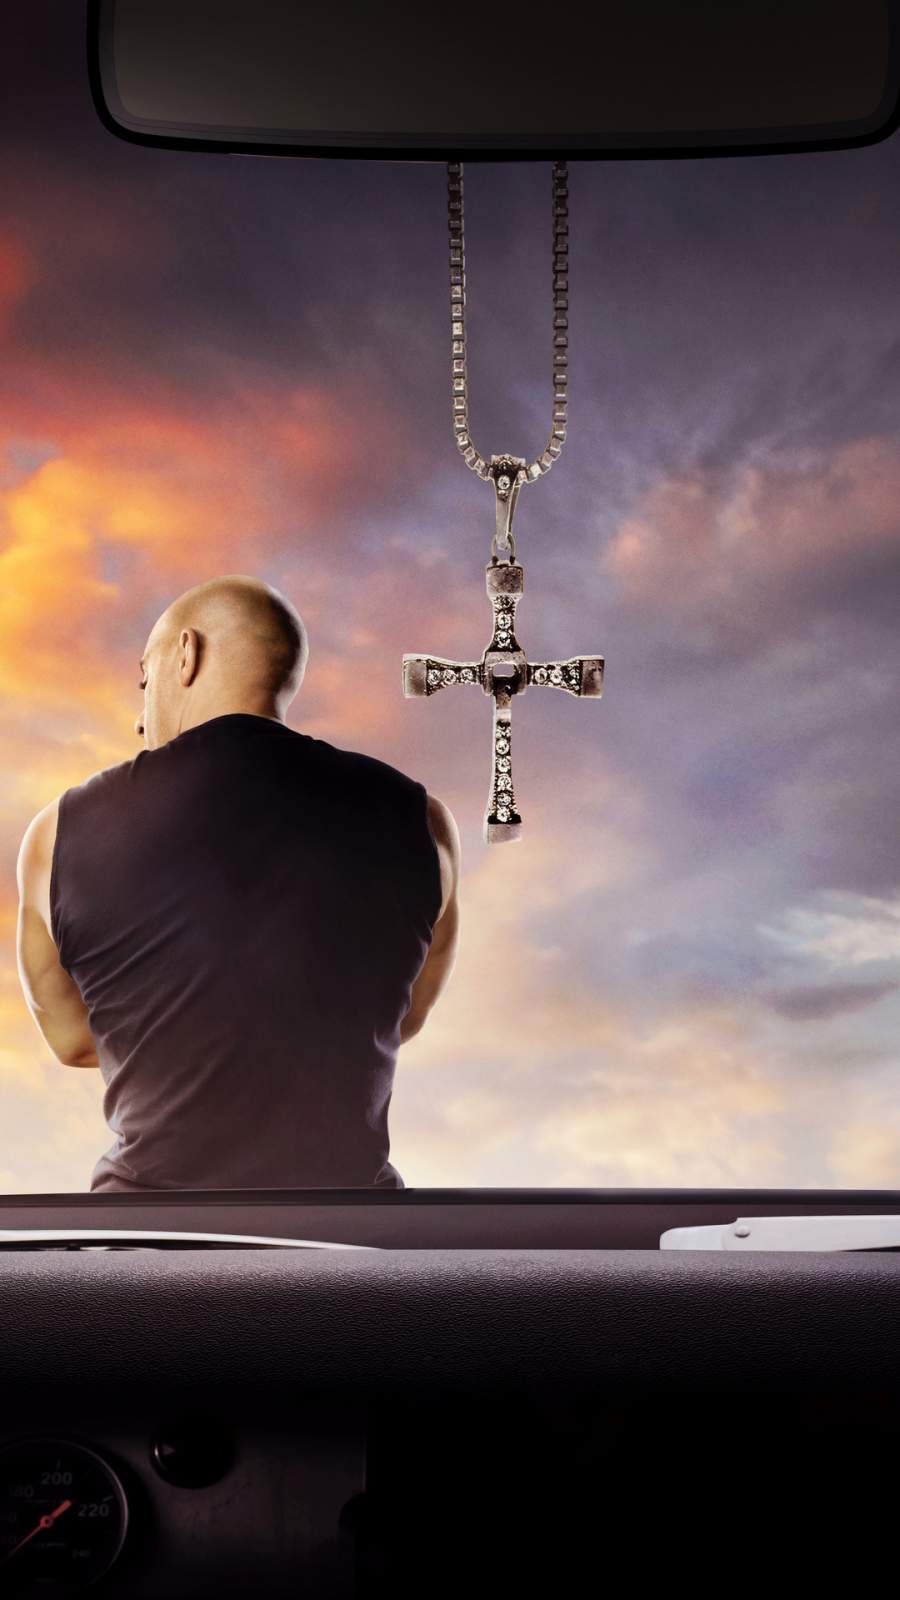 Vin Diesel In Fast And Furious 9 Wallpapers